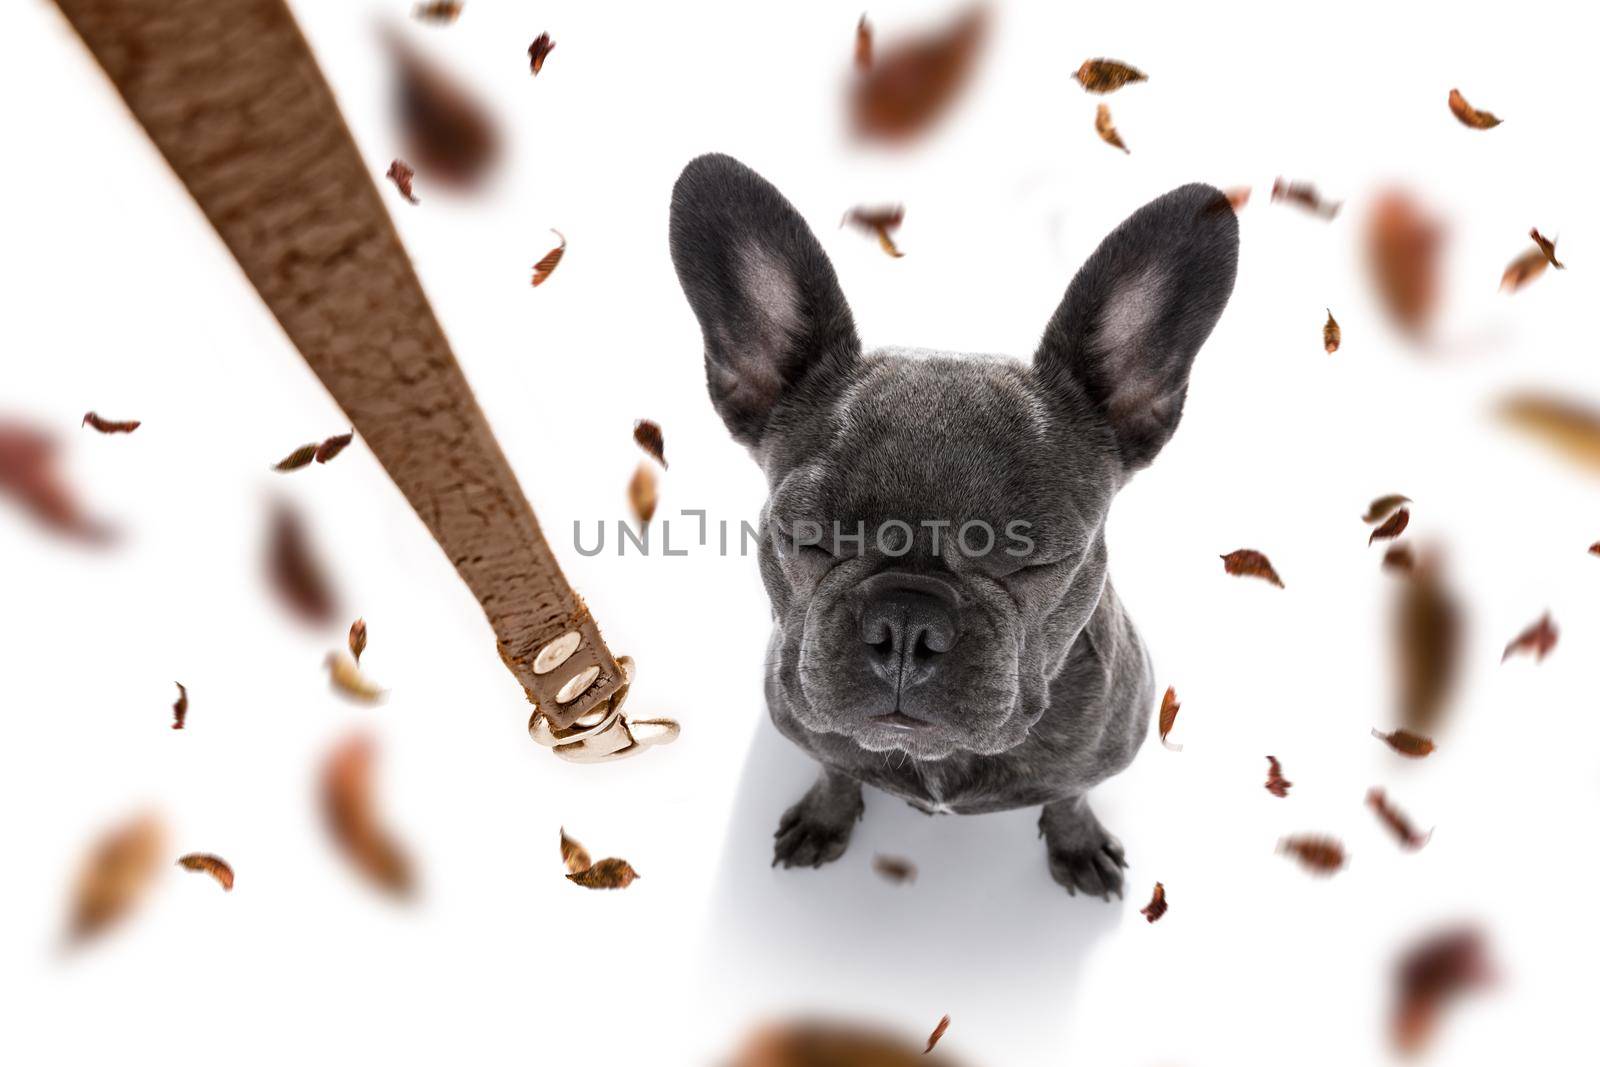 french bulldog  dog waiting for owner to play  and go for a walk with leash, isolated on white background in autumn or fall with leaves